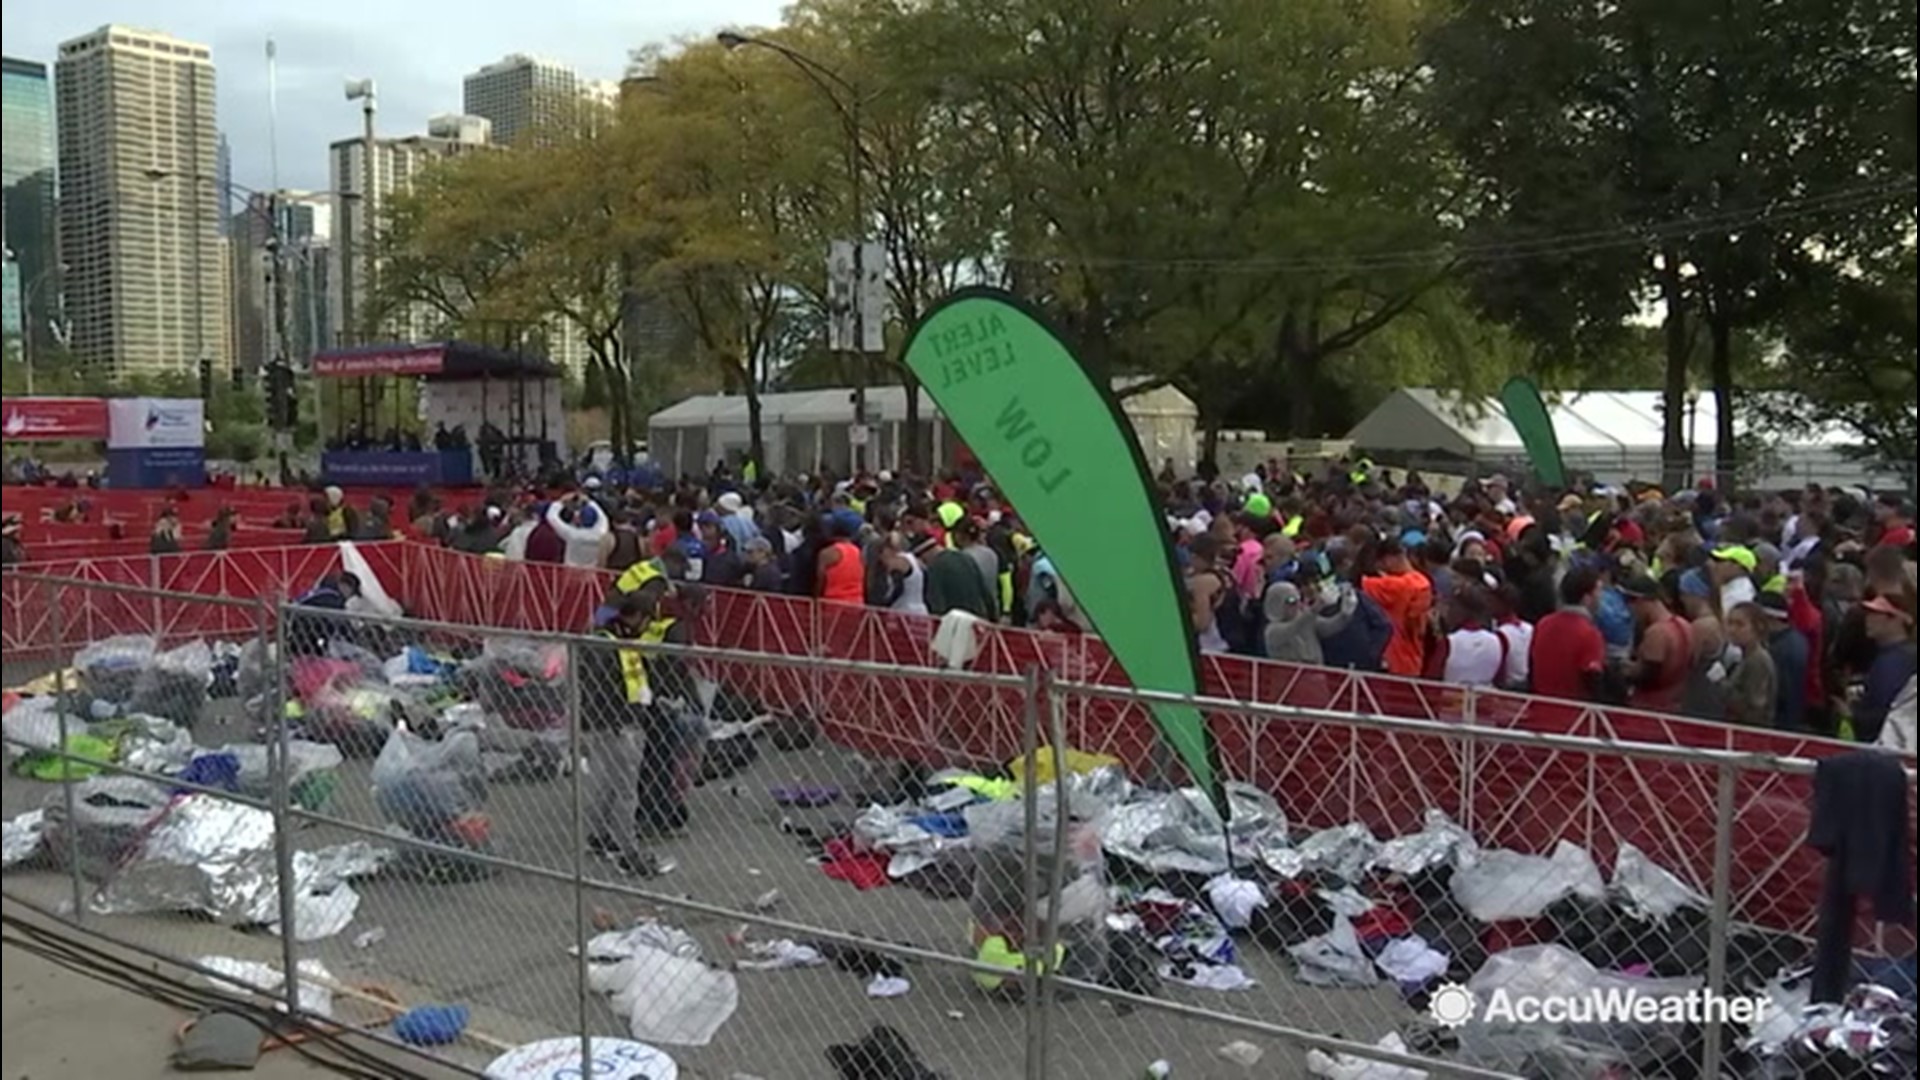 Just 24 hours after a major marathon clean-up crews had to race to get the scene cleared, cleaned and organized. And as Laura Velasquez reports, the weather for both days was superior for runners and organizers.